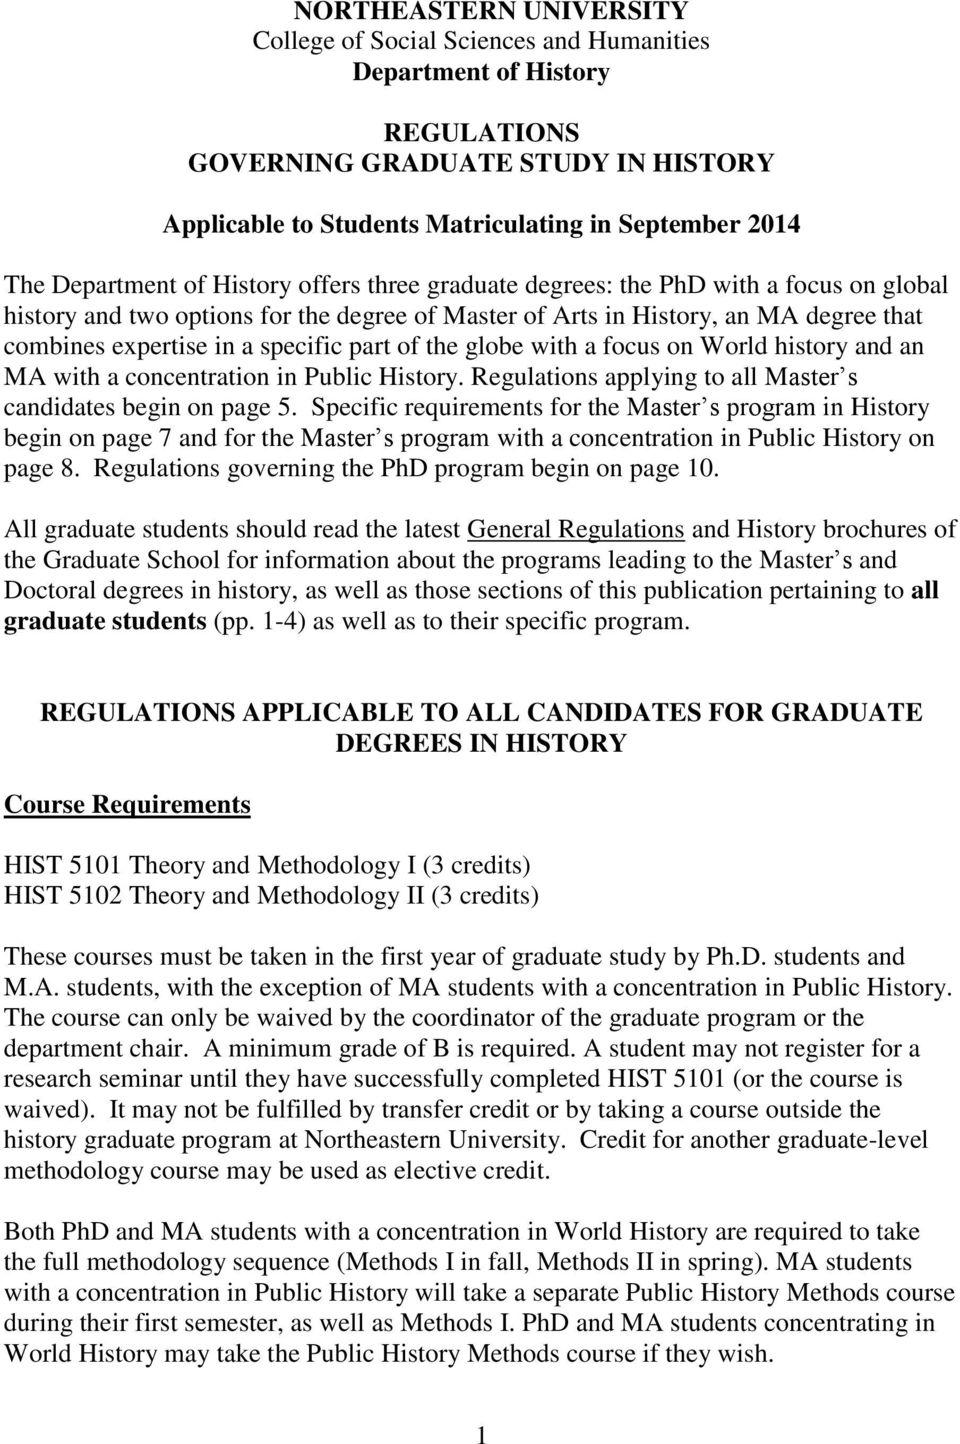 specific part of the globe with a focus on World history and an MA with a concentration in Public History. Regulations applying to all Master s candidates begin on page 5.